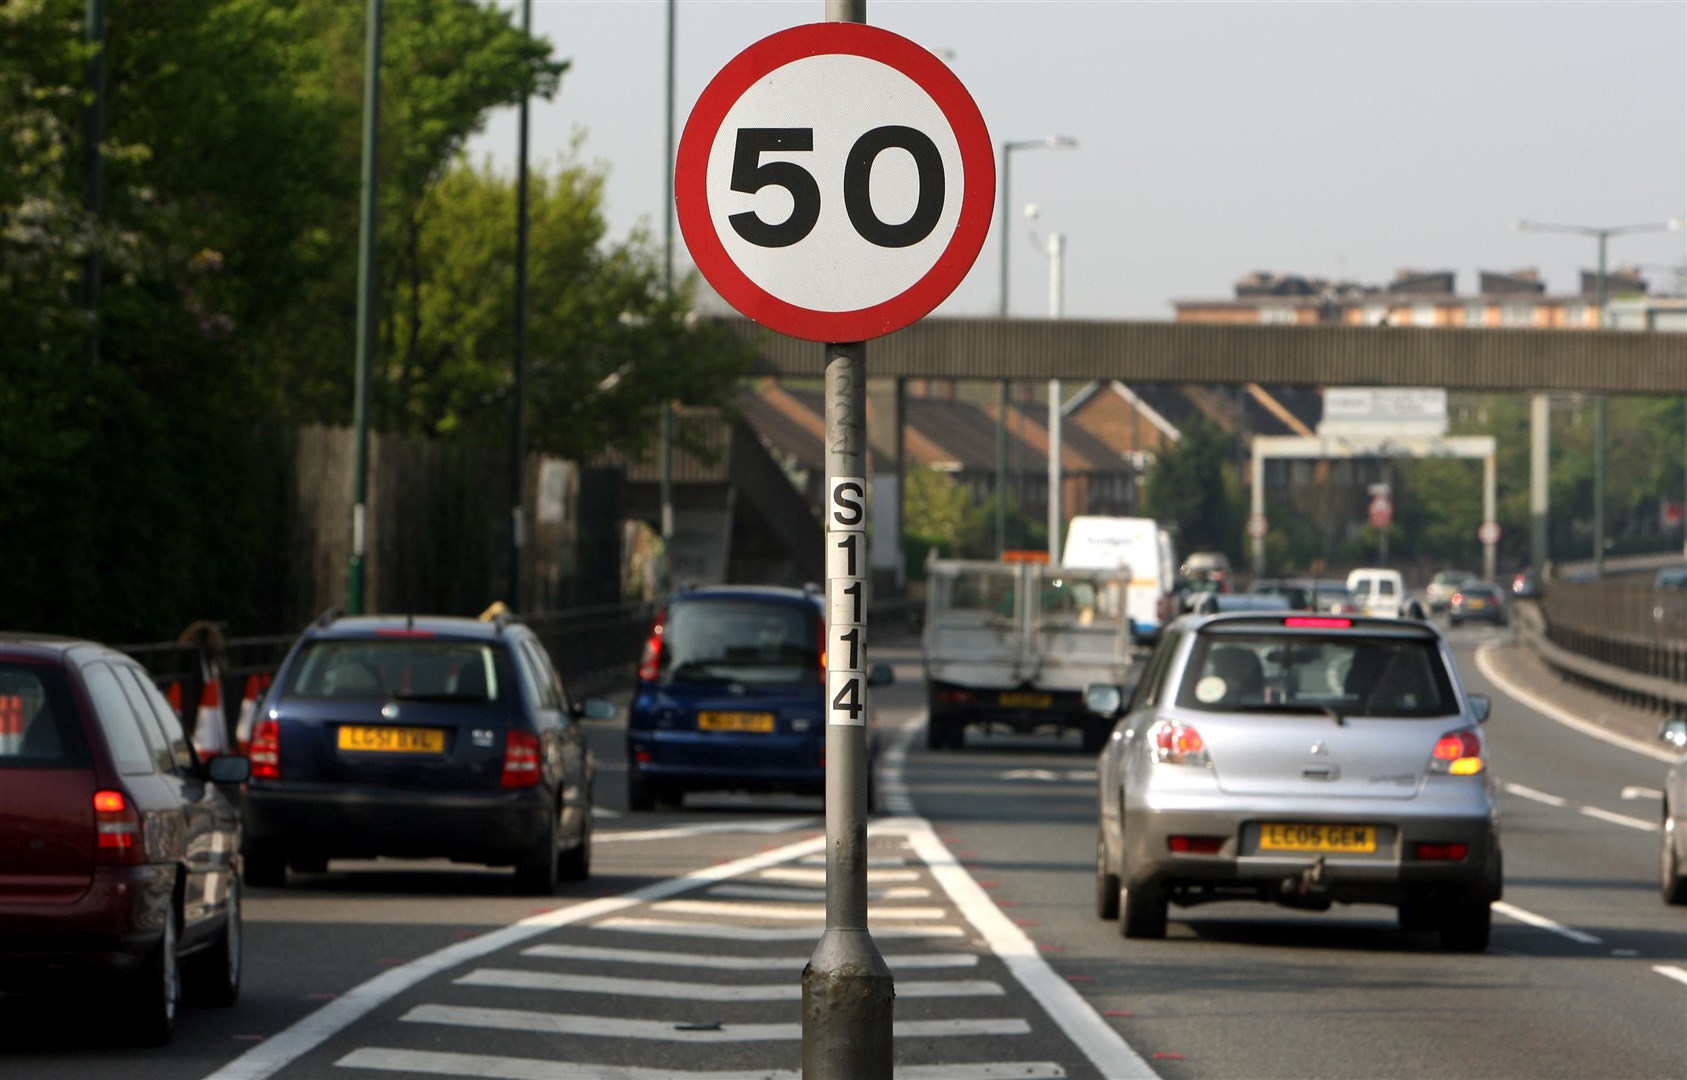 Many motorists are flouting the speed limits.